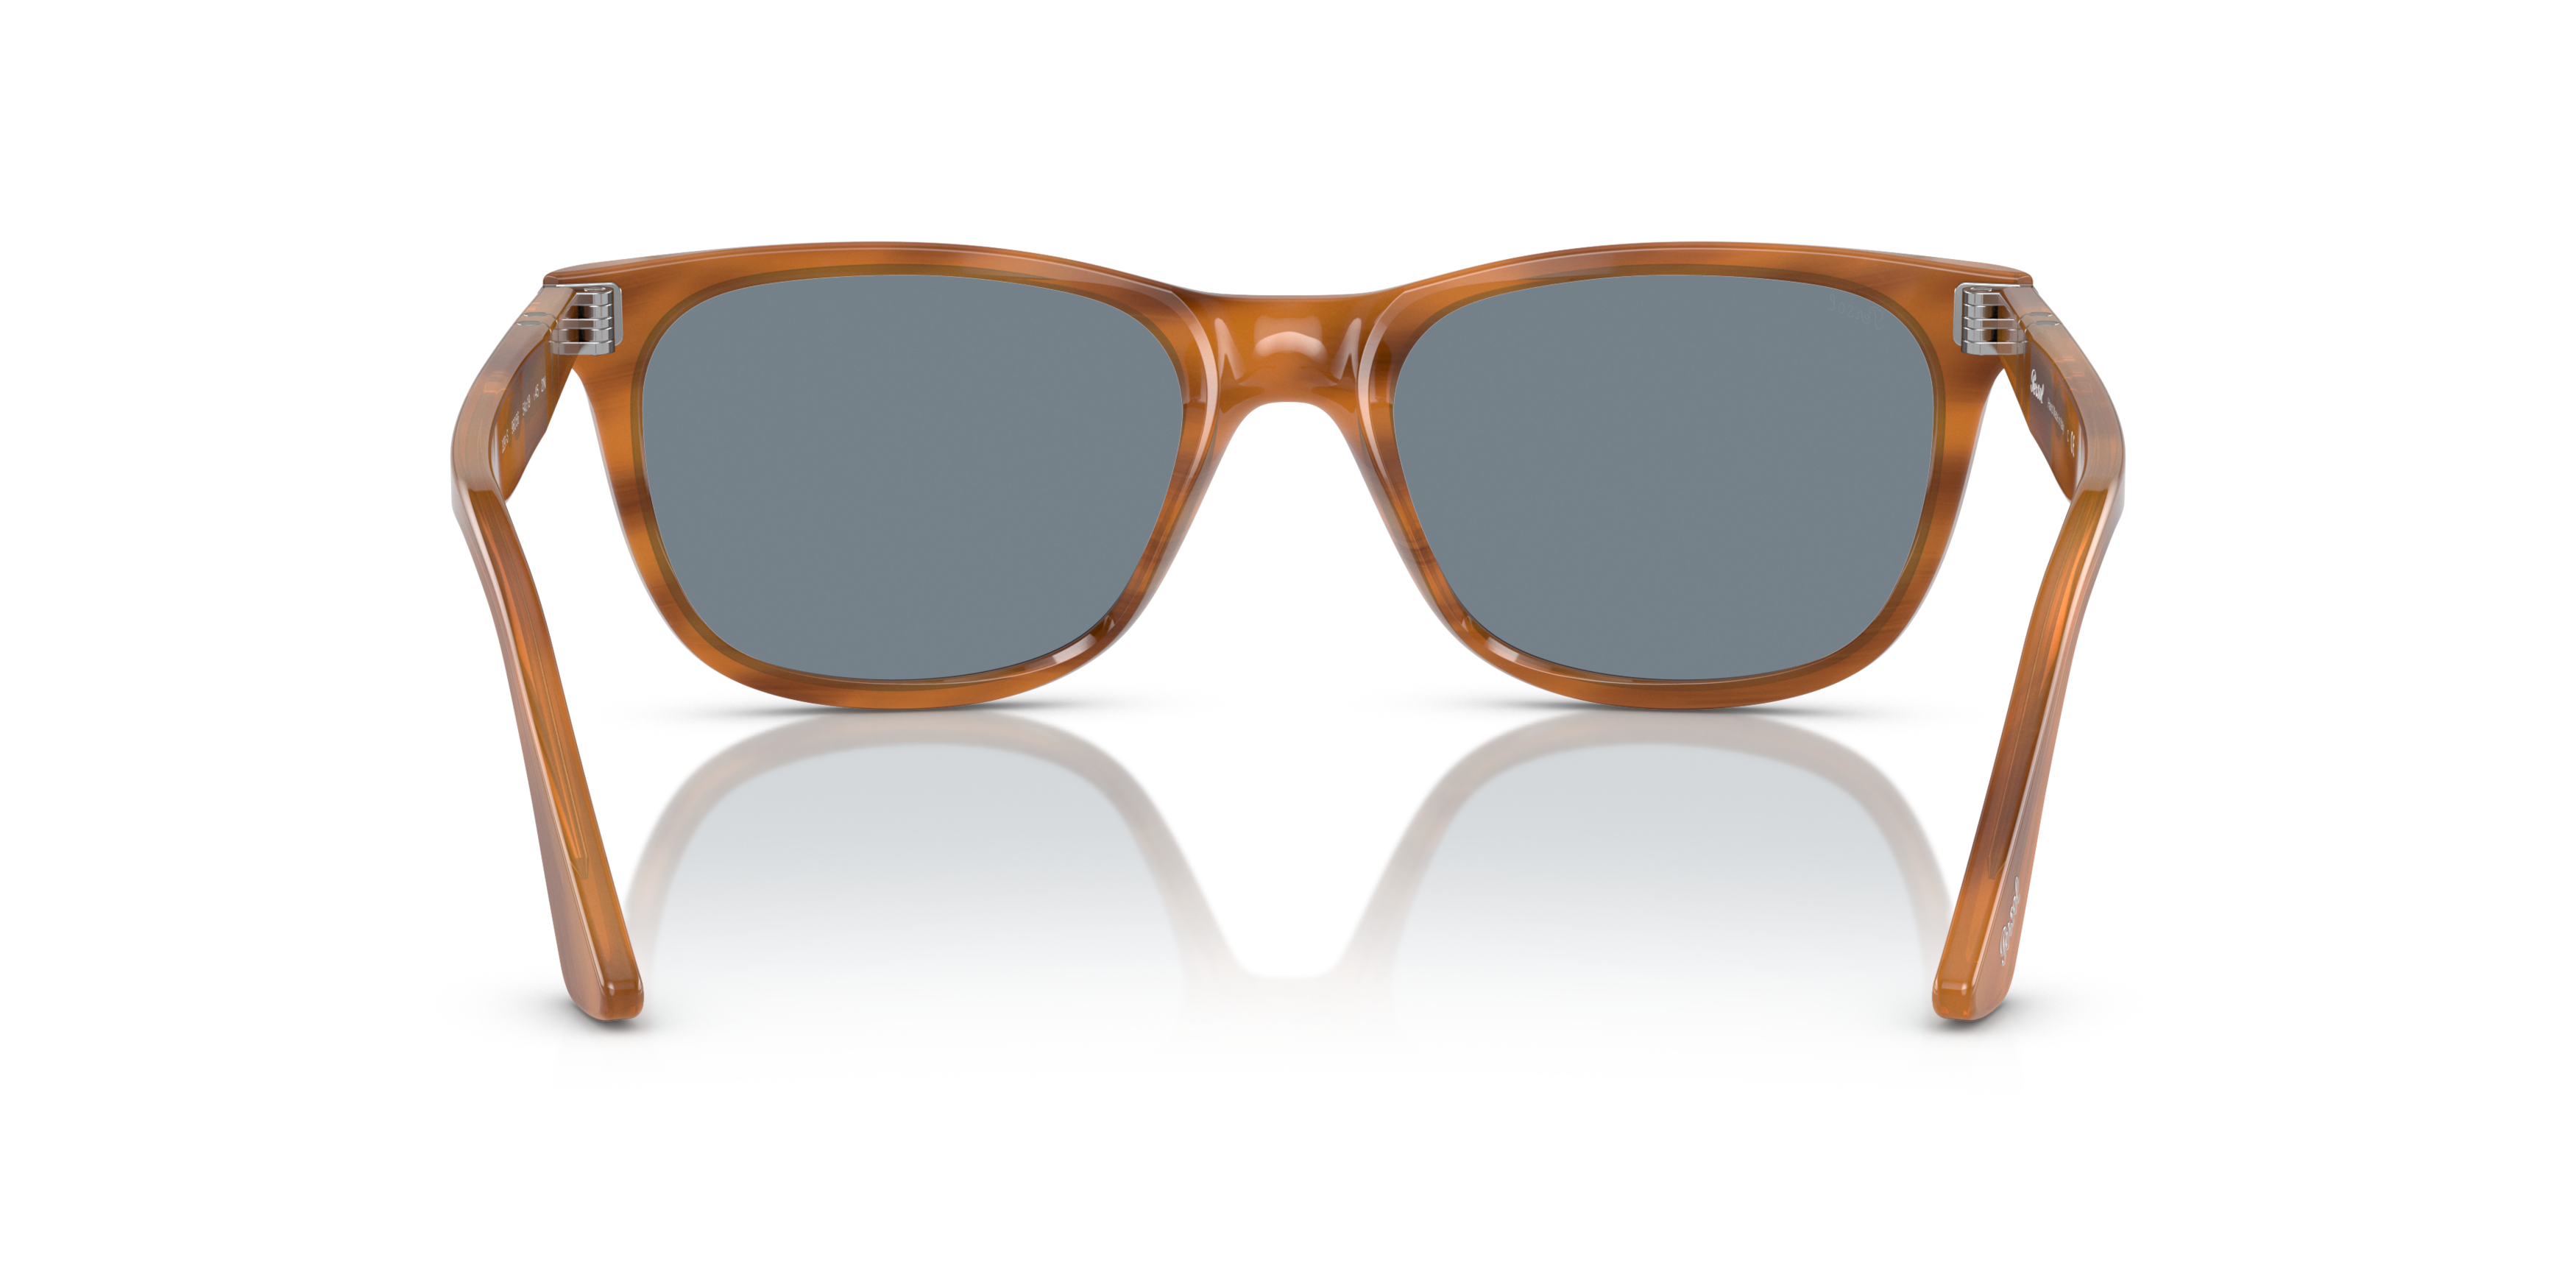 [products.image.detail02] Persol PO3291S 960/56